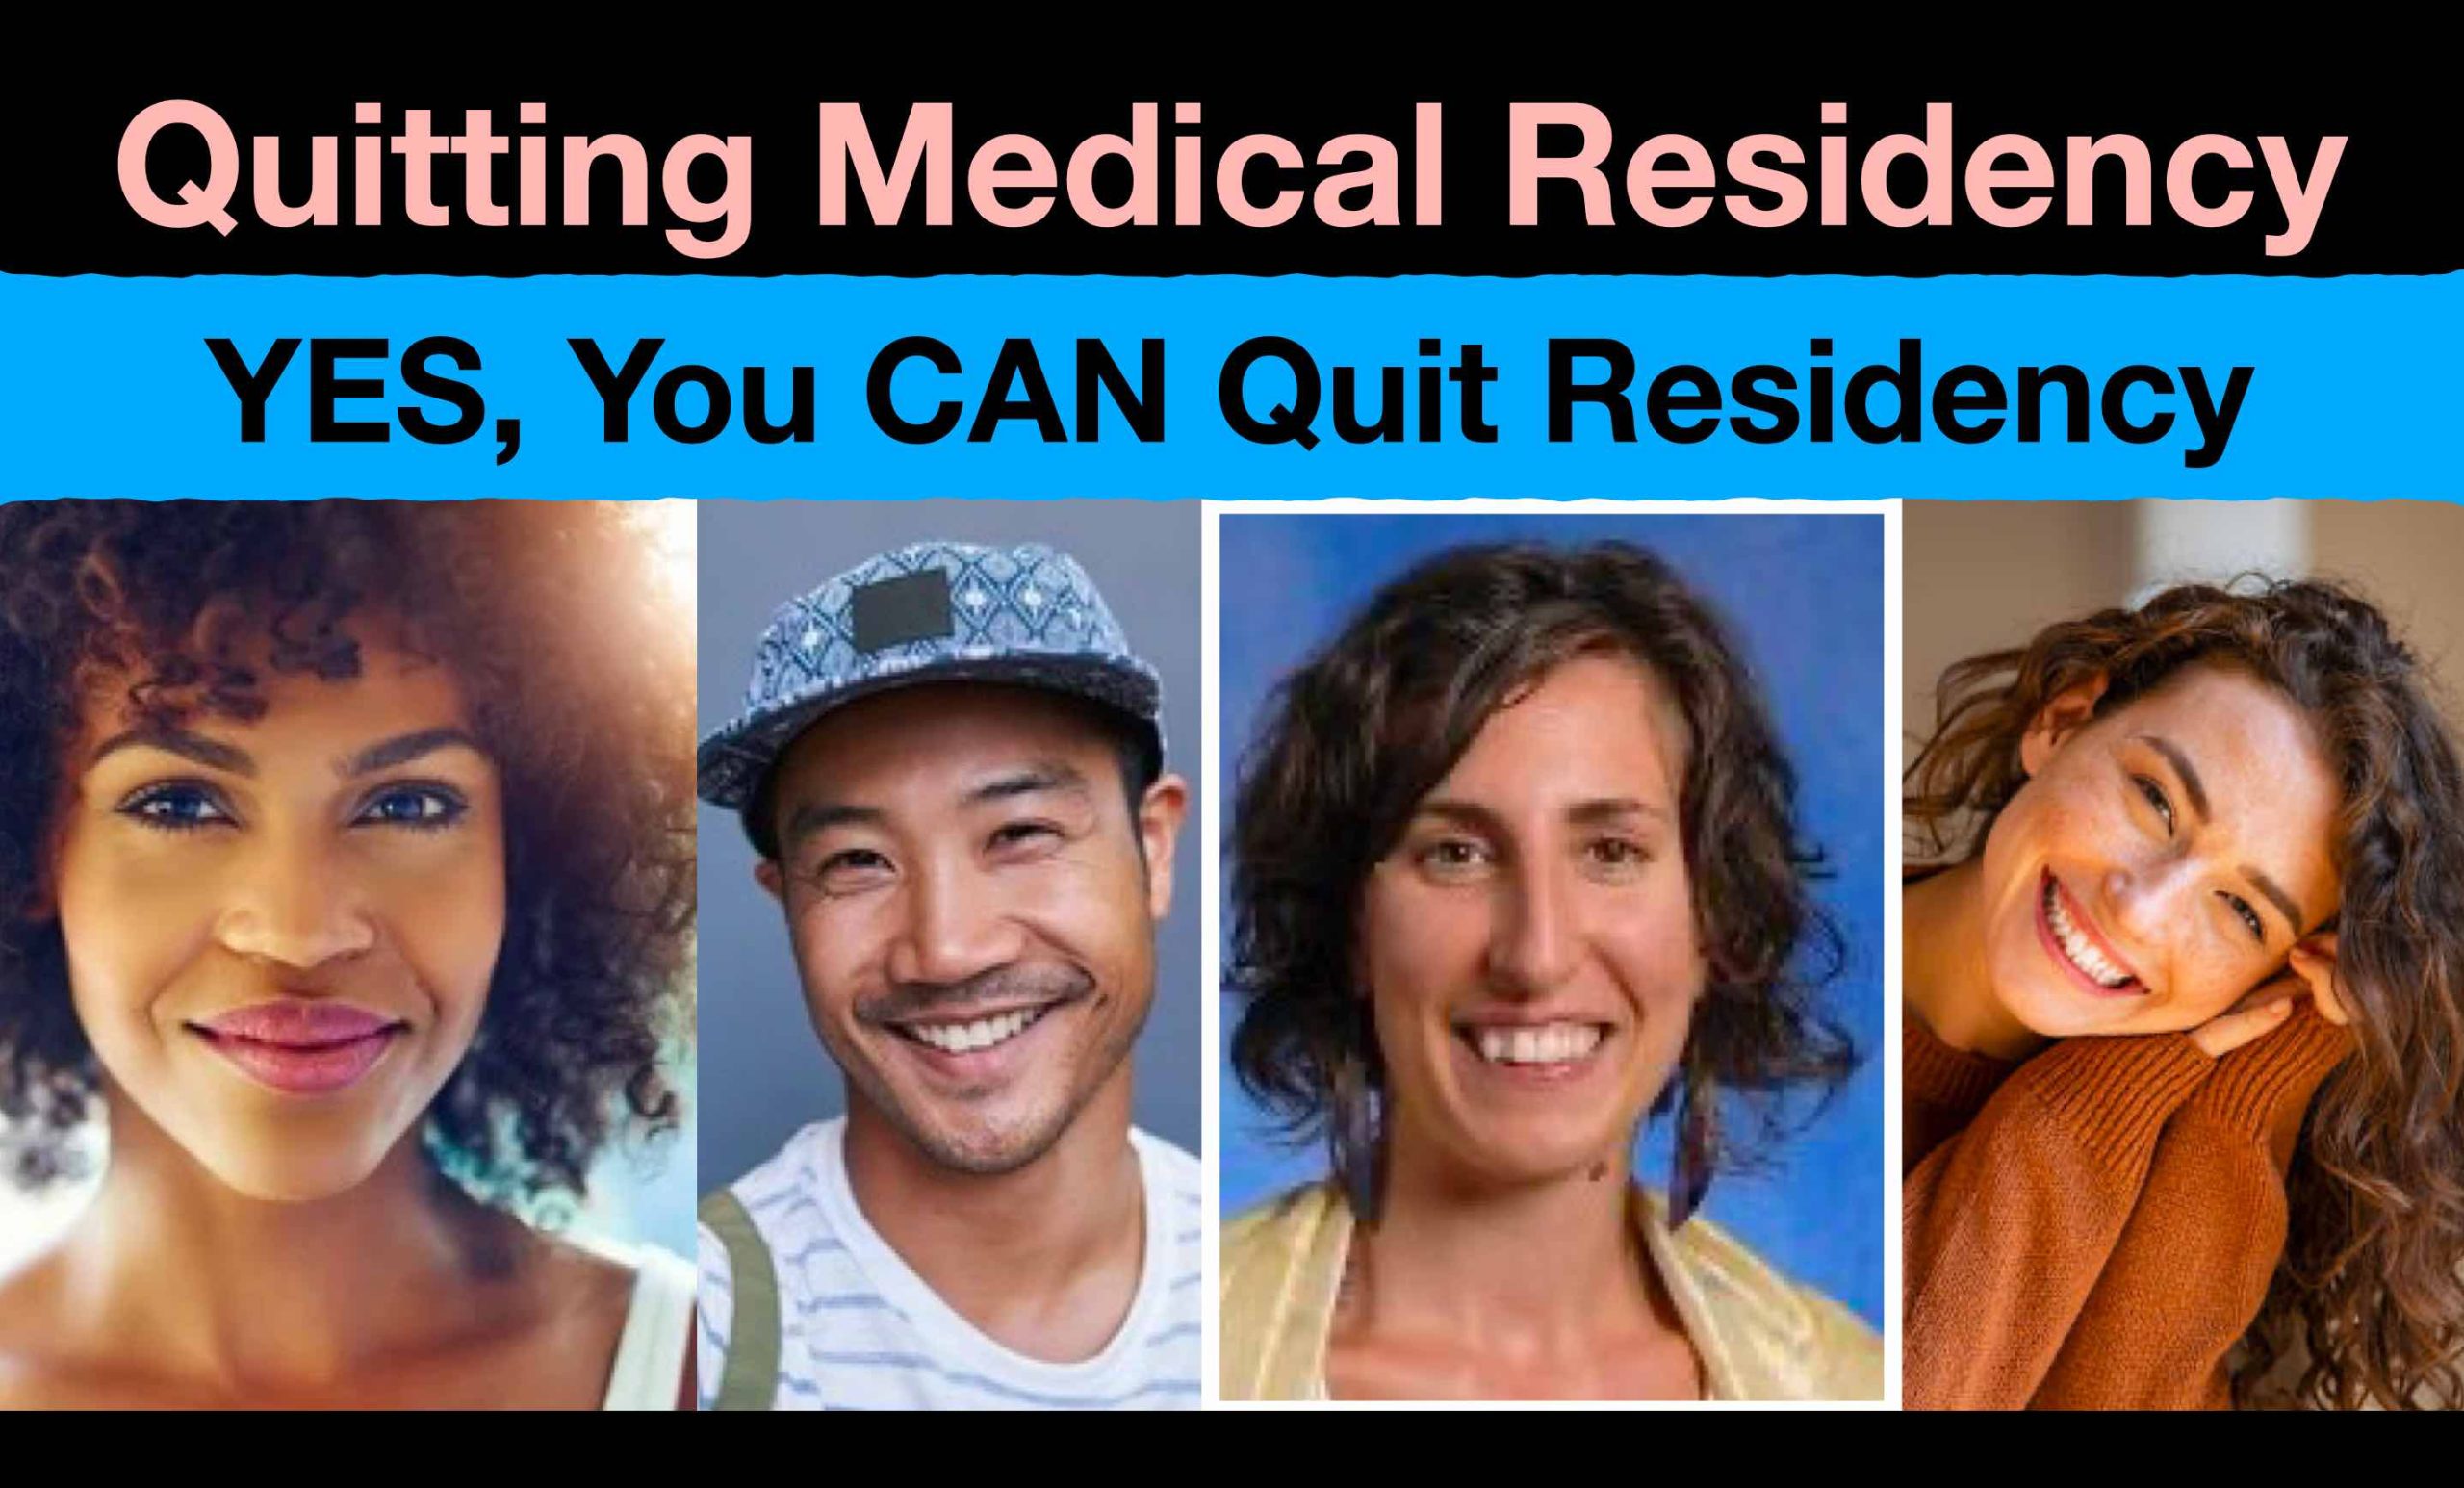 Quitting Medical Residency. Yes, You CAN Quit Residency